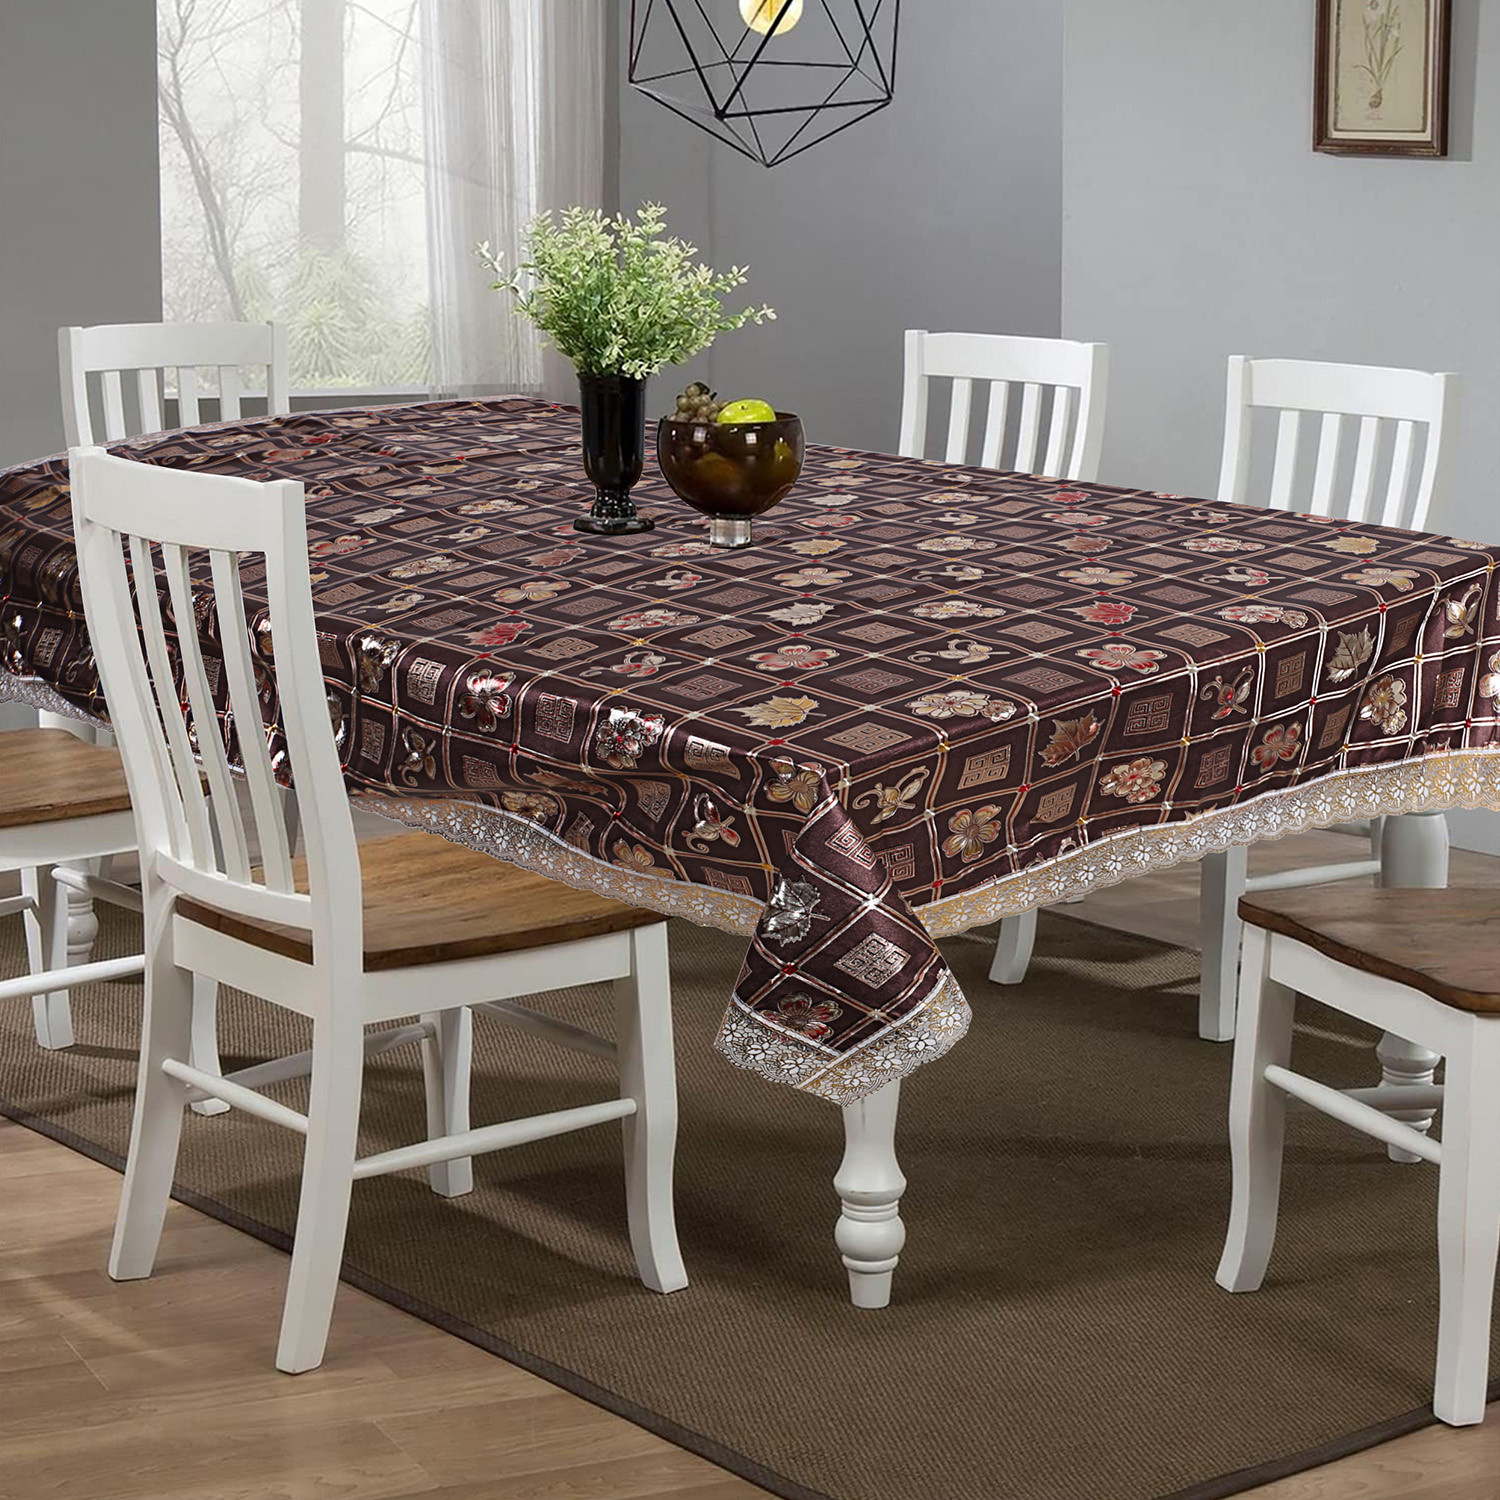 Kuber Industries Dining Table Cover|PVC Spill Proof Geometric Pattern Tablecloth|Kitchen Dinning Protector With Seamless Border, 60X90 Inch (Gold)